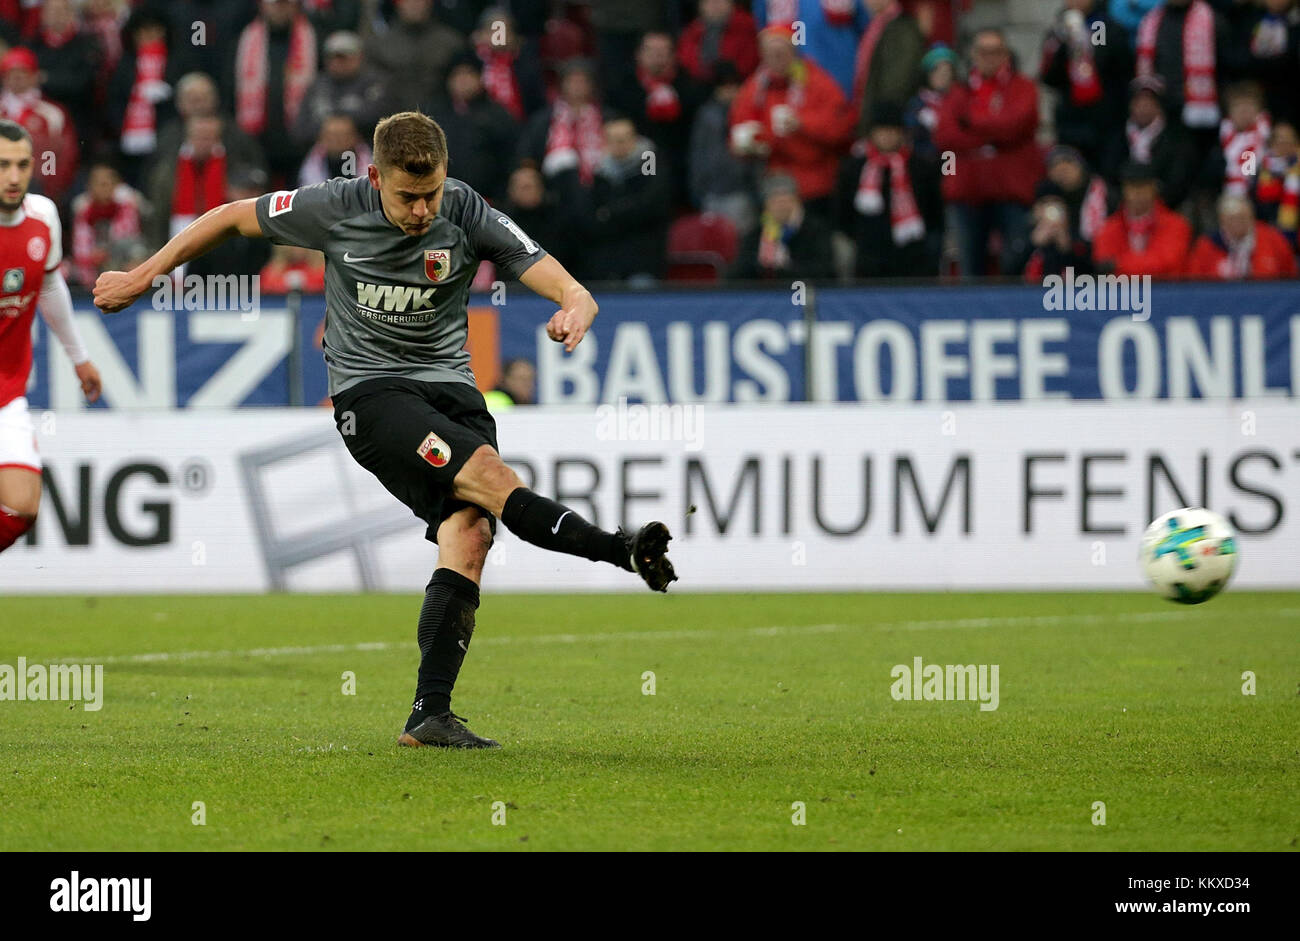 Mainz, Germany. 2nd Dec, 2017. Augsburg's Alfred Finnbogason scores a penalty to make it 2:0 during the German Bundesliga football match between FSV Mainz 05 and FC Augsburg at the Opel Arena in Mainz, Germany, 2 December 2017. (EMBARGO CONDITIONS - ATTENTION: Due to the accreditation guidelines, the DFL only permits the publication and utilisation of up to 15 pictures per match on the internet and in online media during the match.) Credit: Hasan Bratic/dpa/Alamy Live News Stock Photo